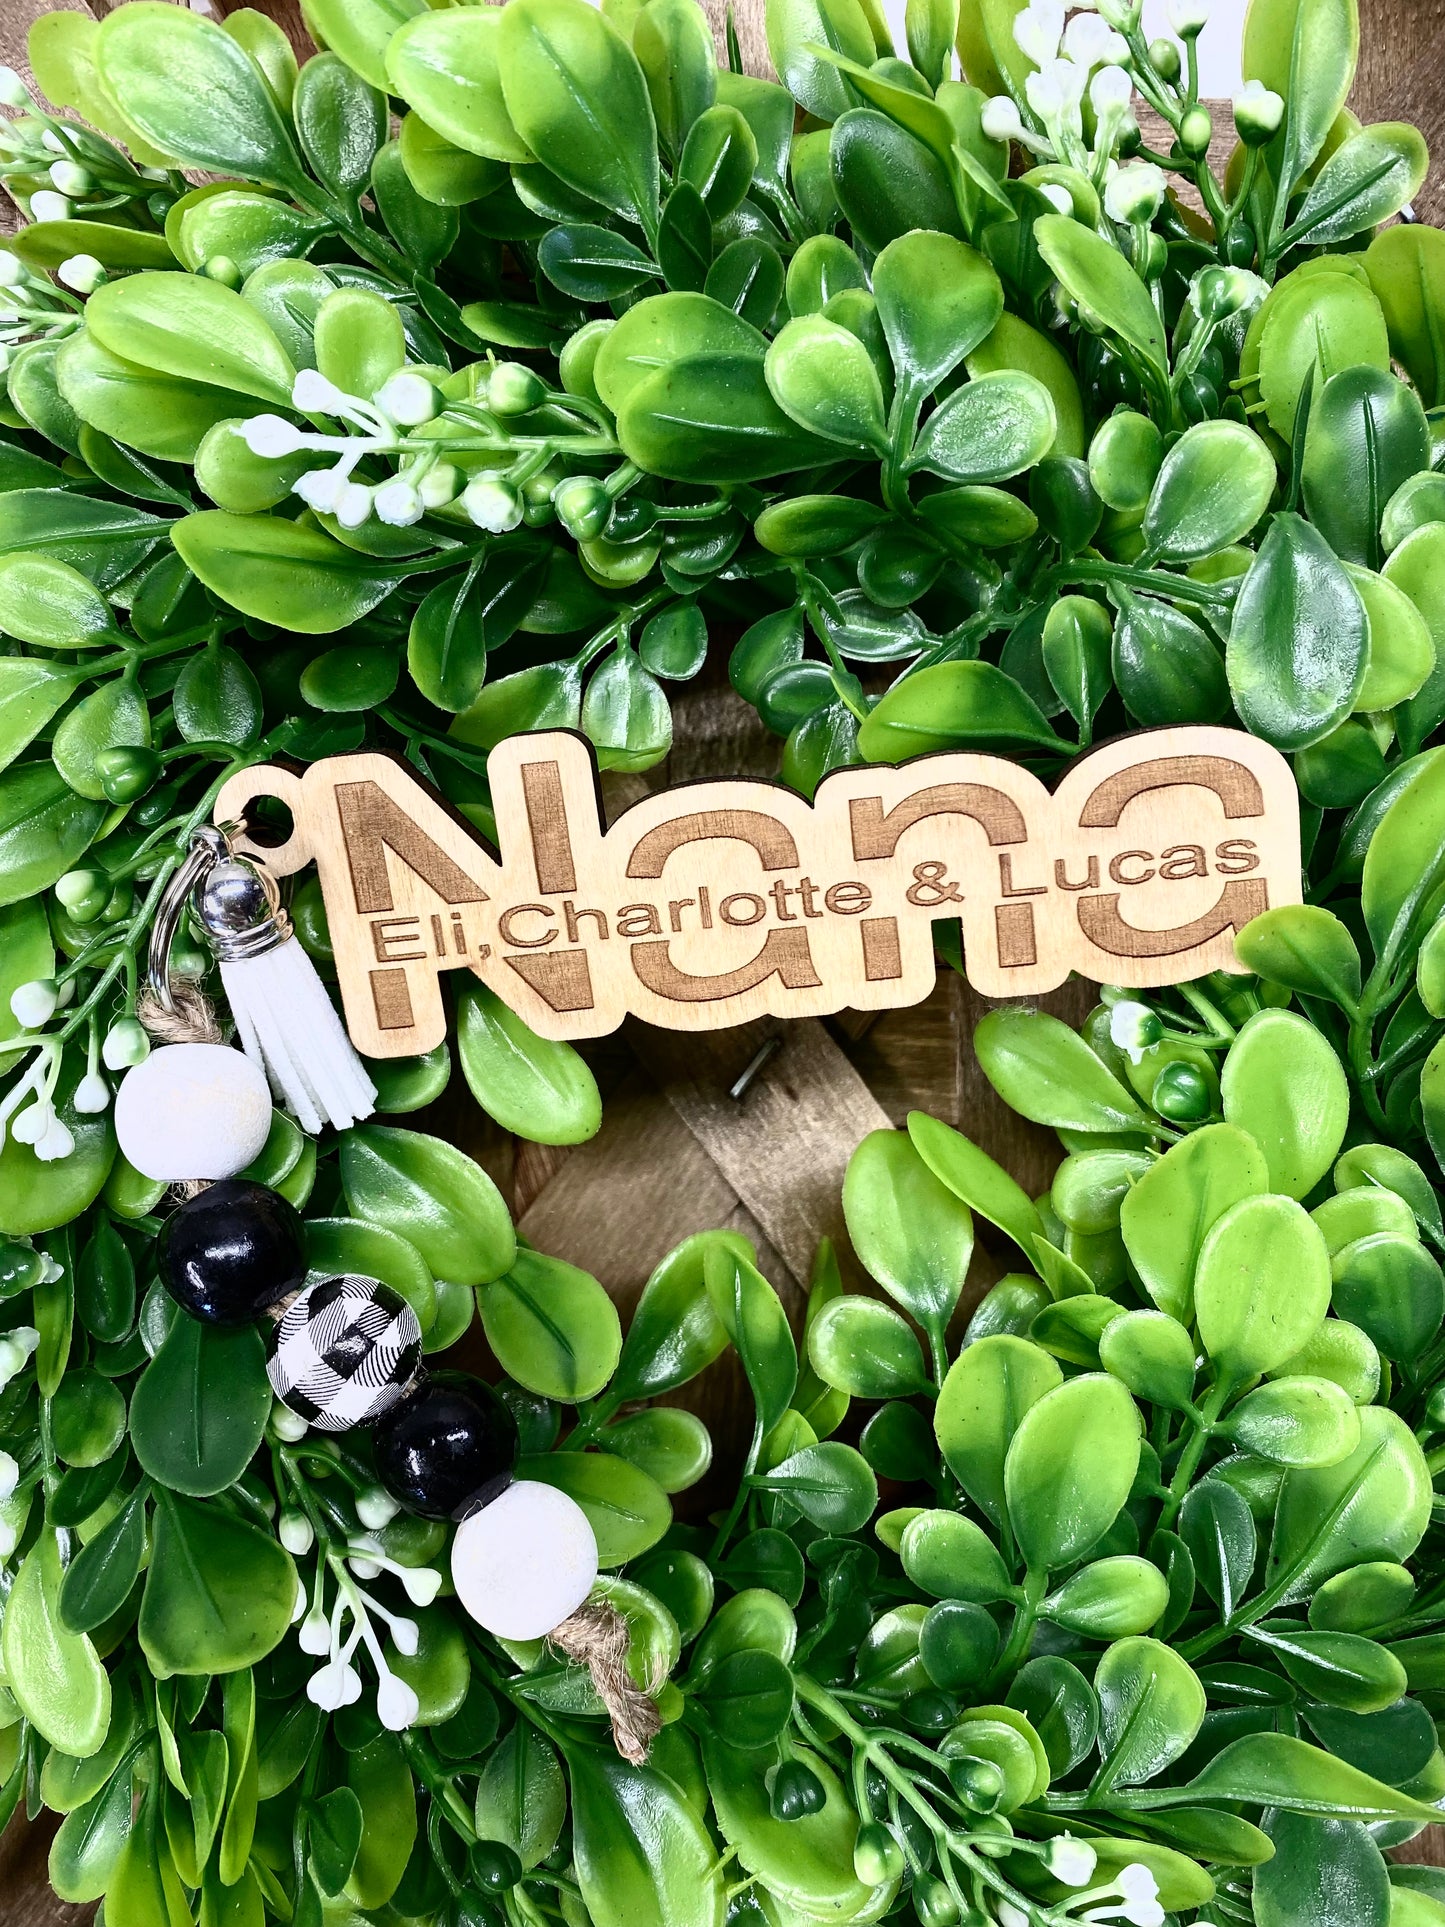 Nana Personalized Keychain with Kids Names, Wood Engraved Nana Keychain, Mother's Day Gift from Grandkids, Grandma Gift